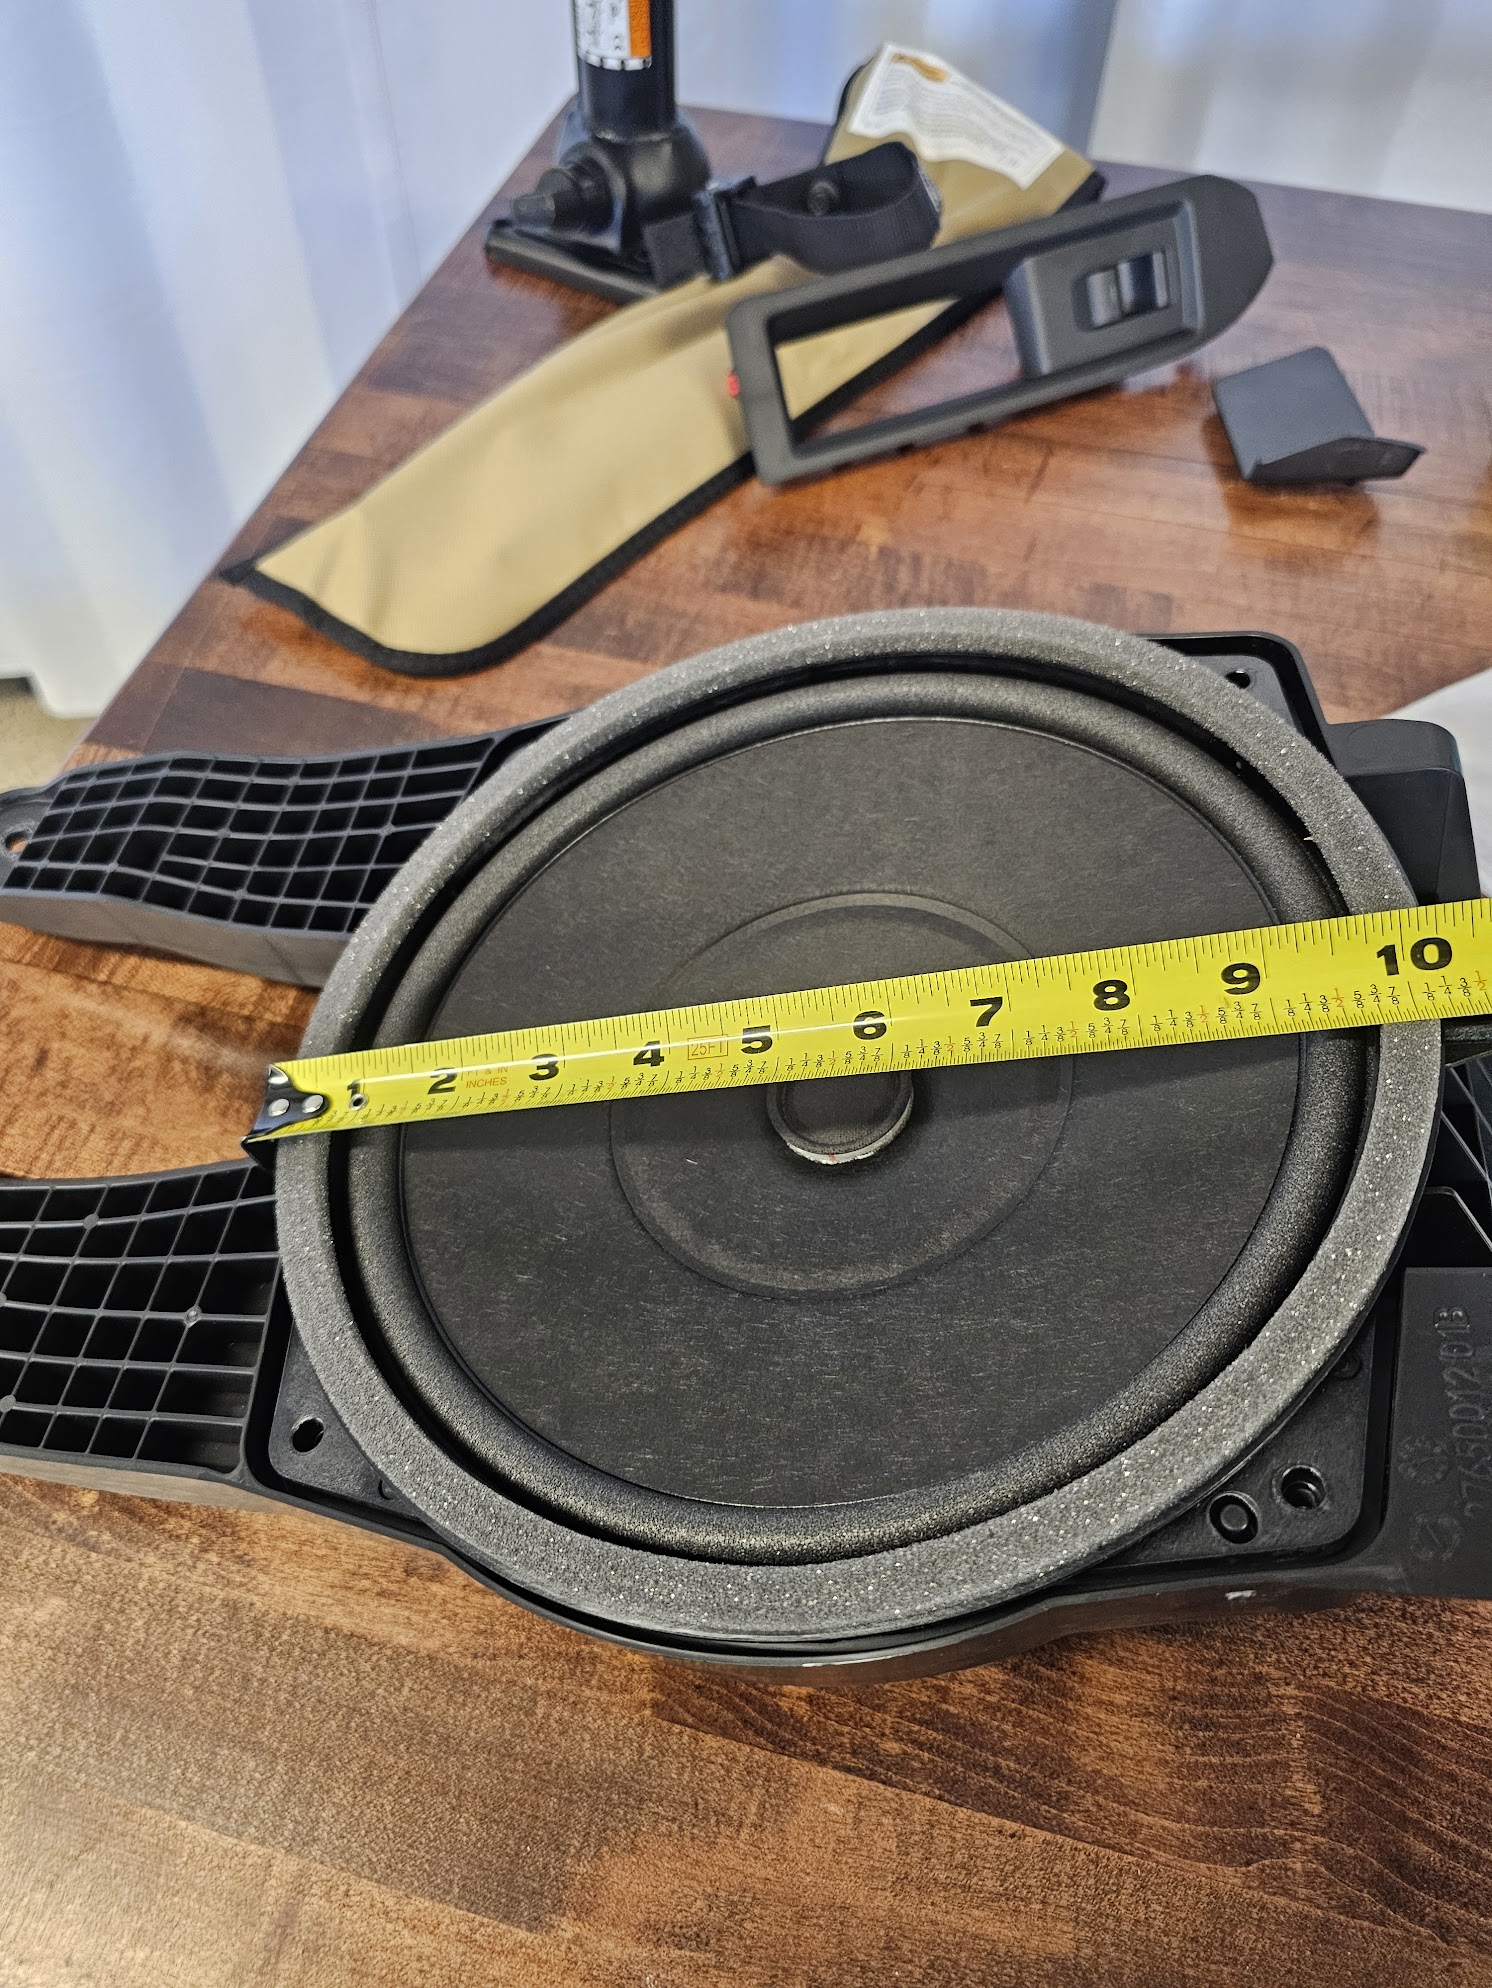 2024 Tacoma Dimensions of factory JBL 8" Subwoofer? [updated with measurements of 6" speakers and 10" subwoofer] 20240421_150539